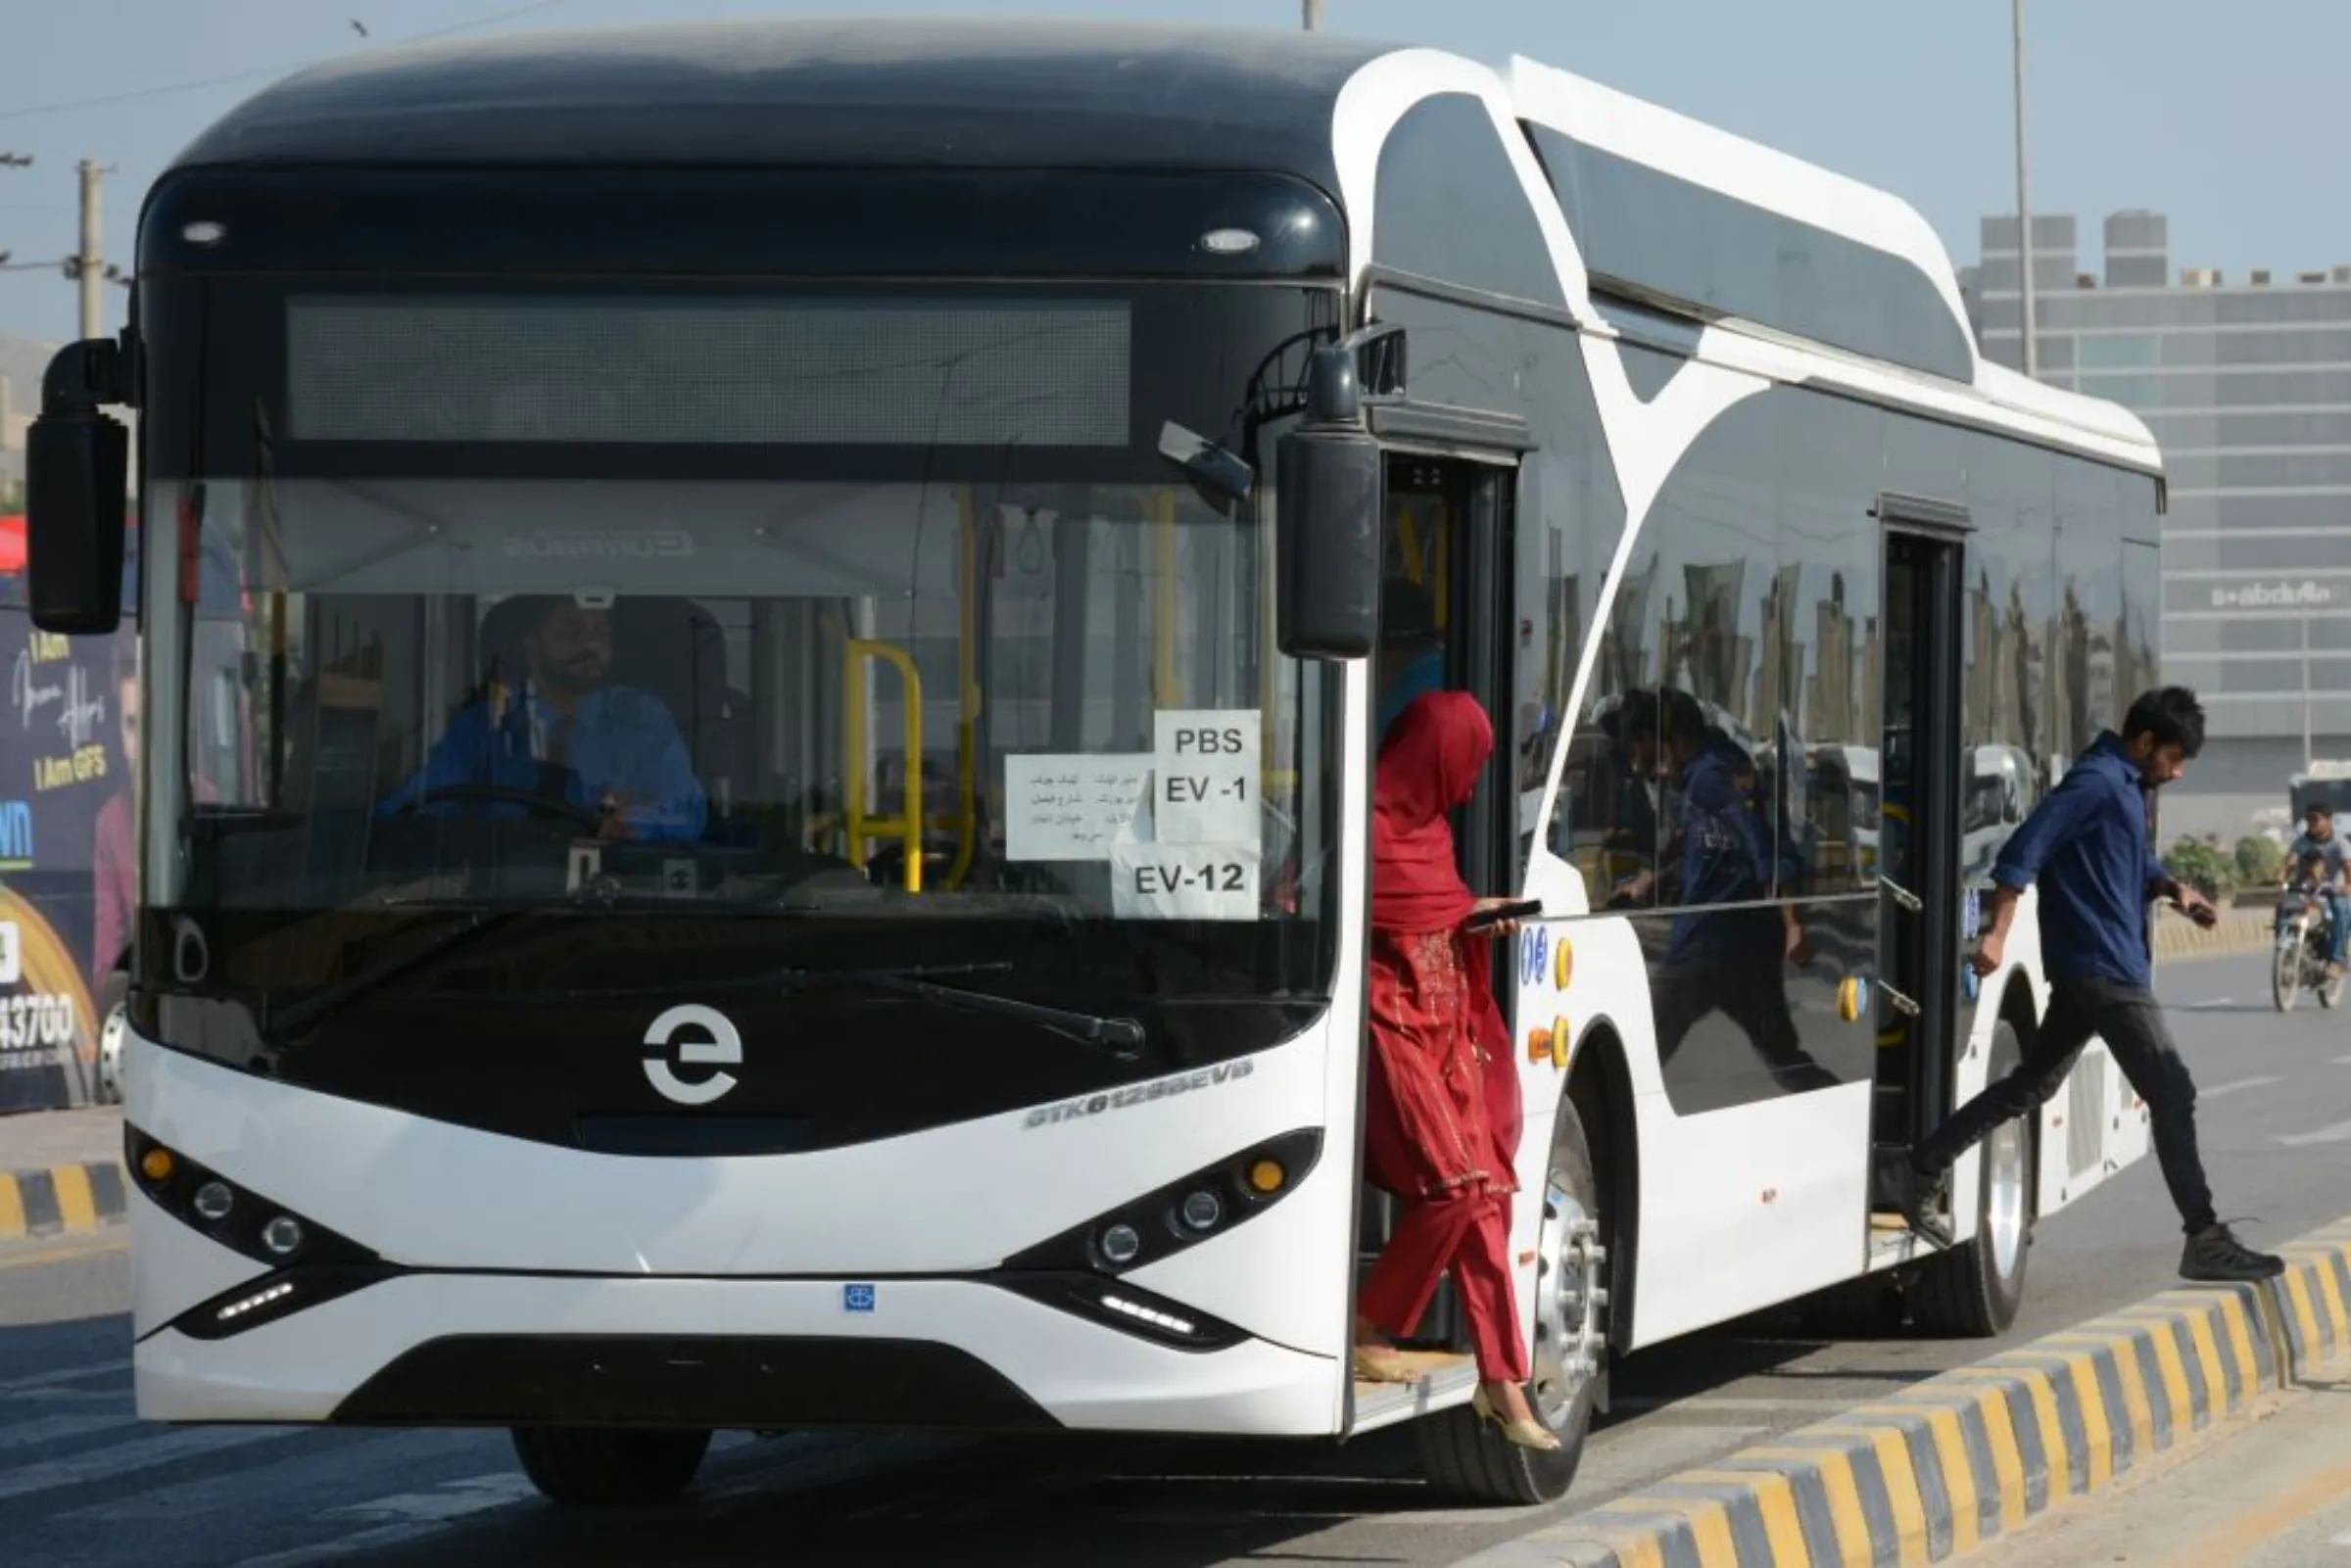 Passengers are getting off an electric bus in the neighbourhood of Defense Housing Authority (DHA), Karachi, Pakistan, March 5, 2023